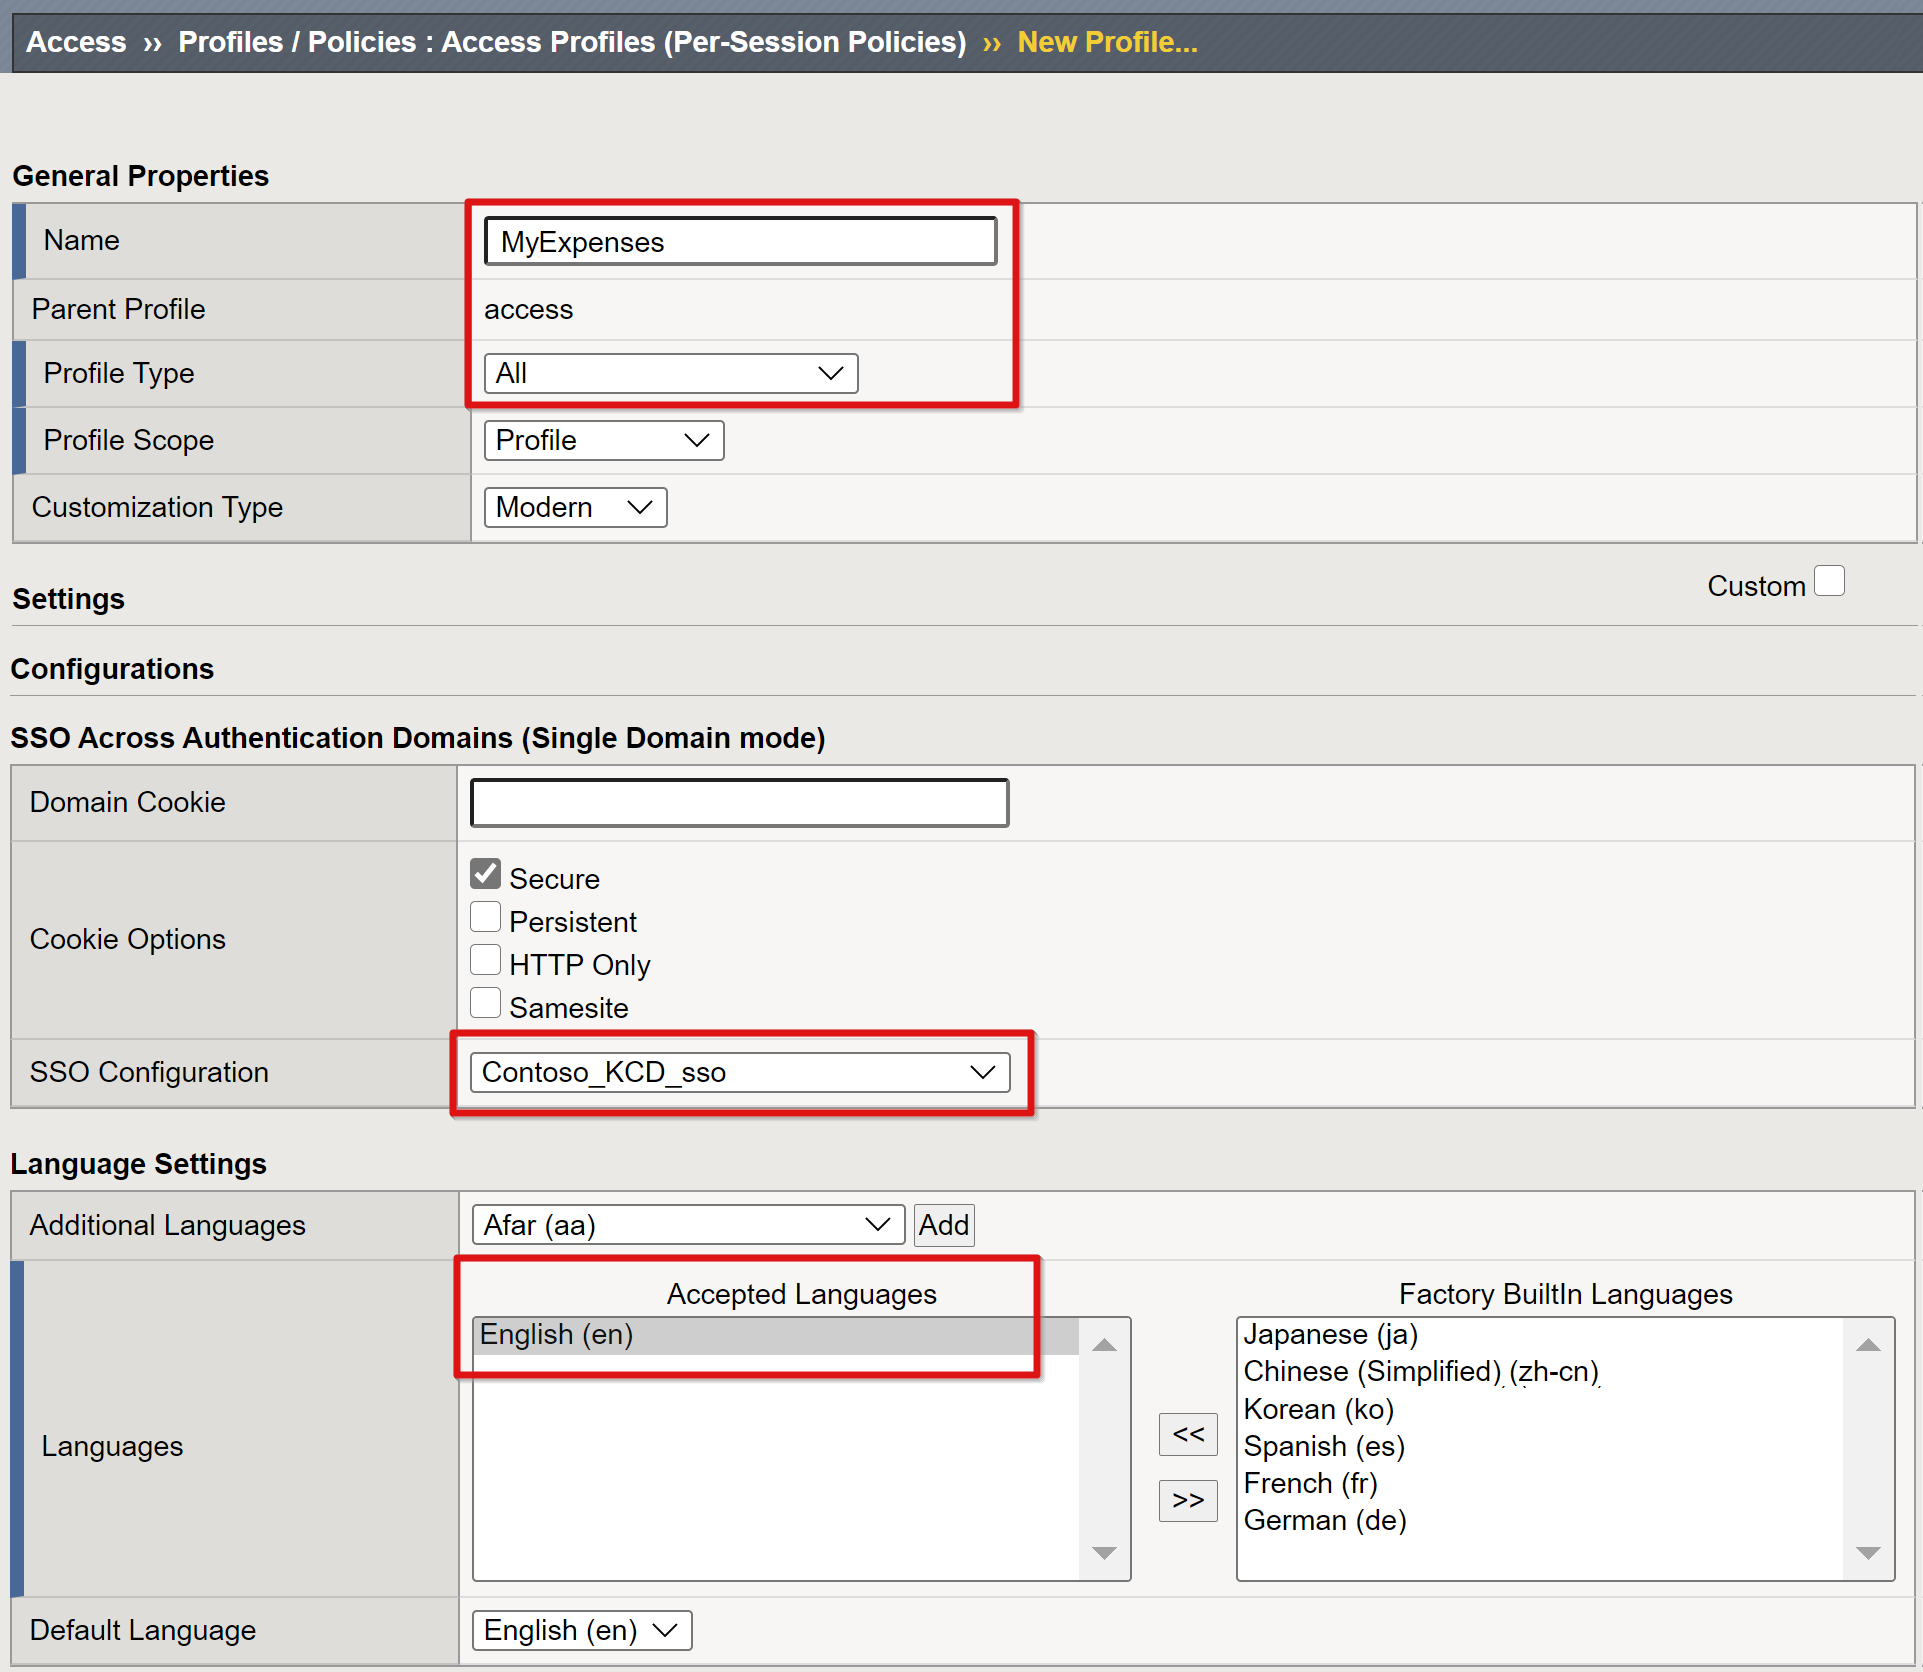 Screenshot of entries for General Properties, SSO Across Authentication Domains, and Language Settings.